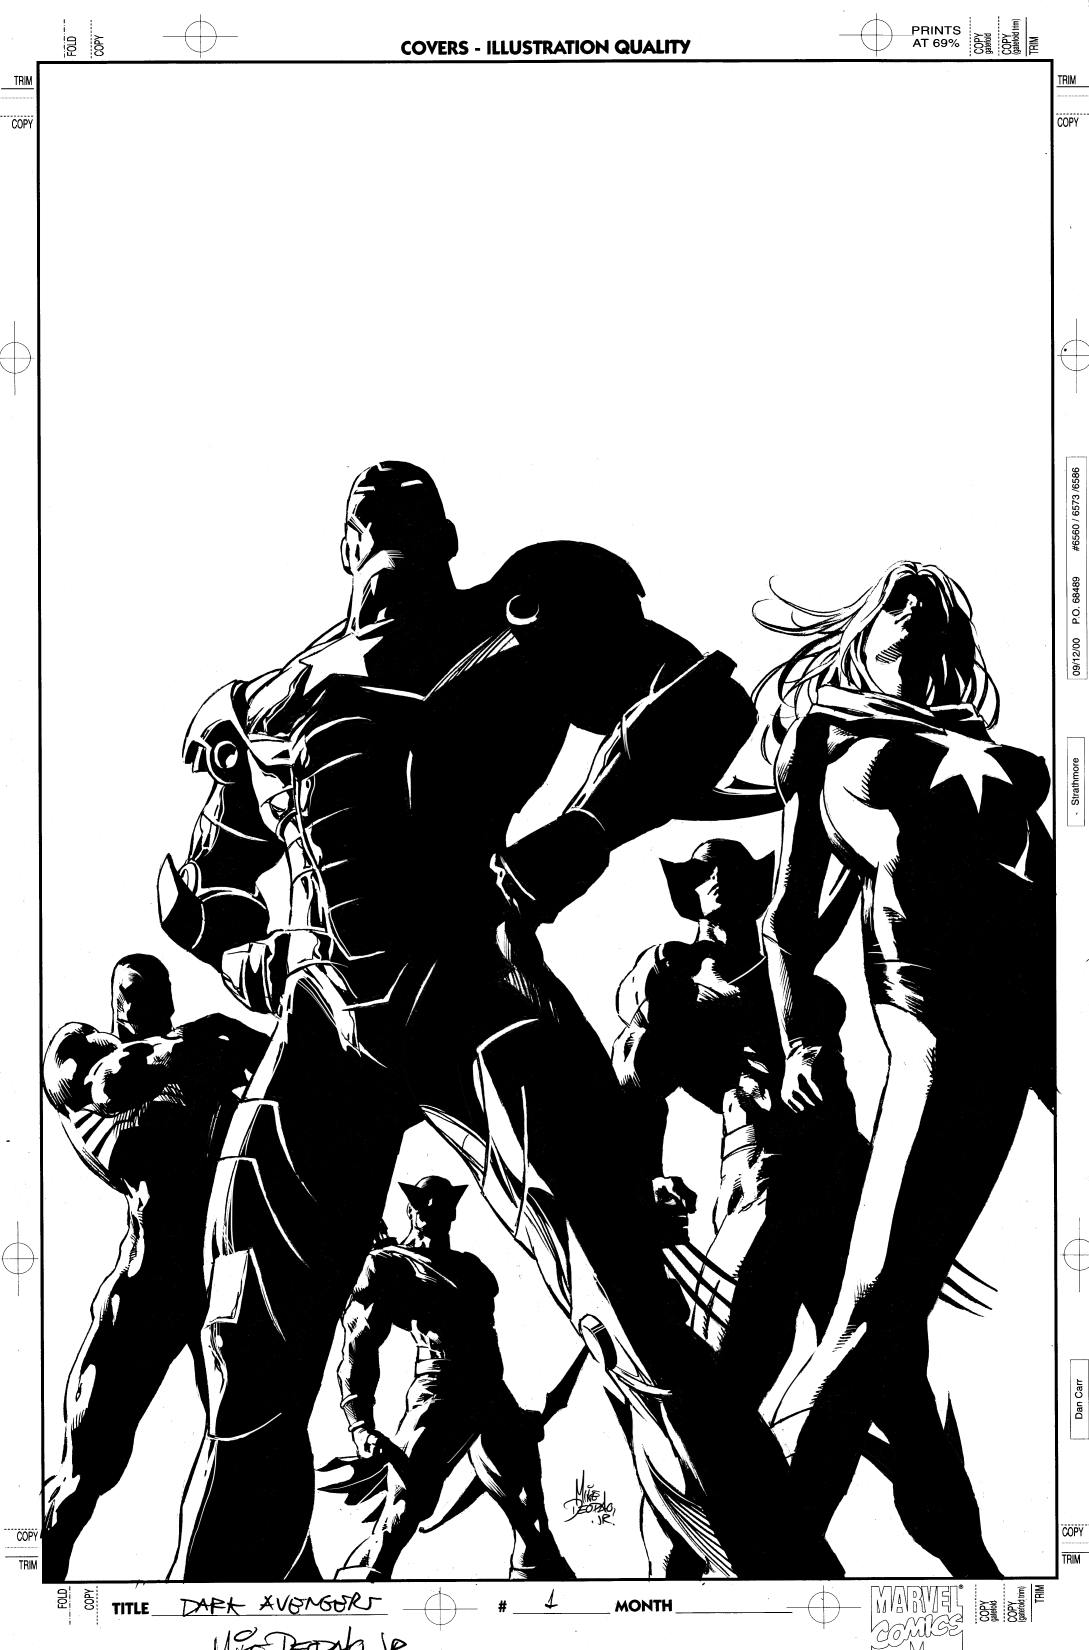 Dark Avengers #1 cover by Mike Deodato, Jr.